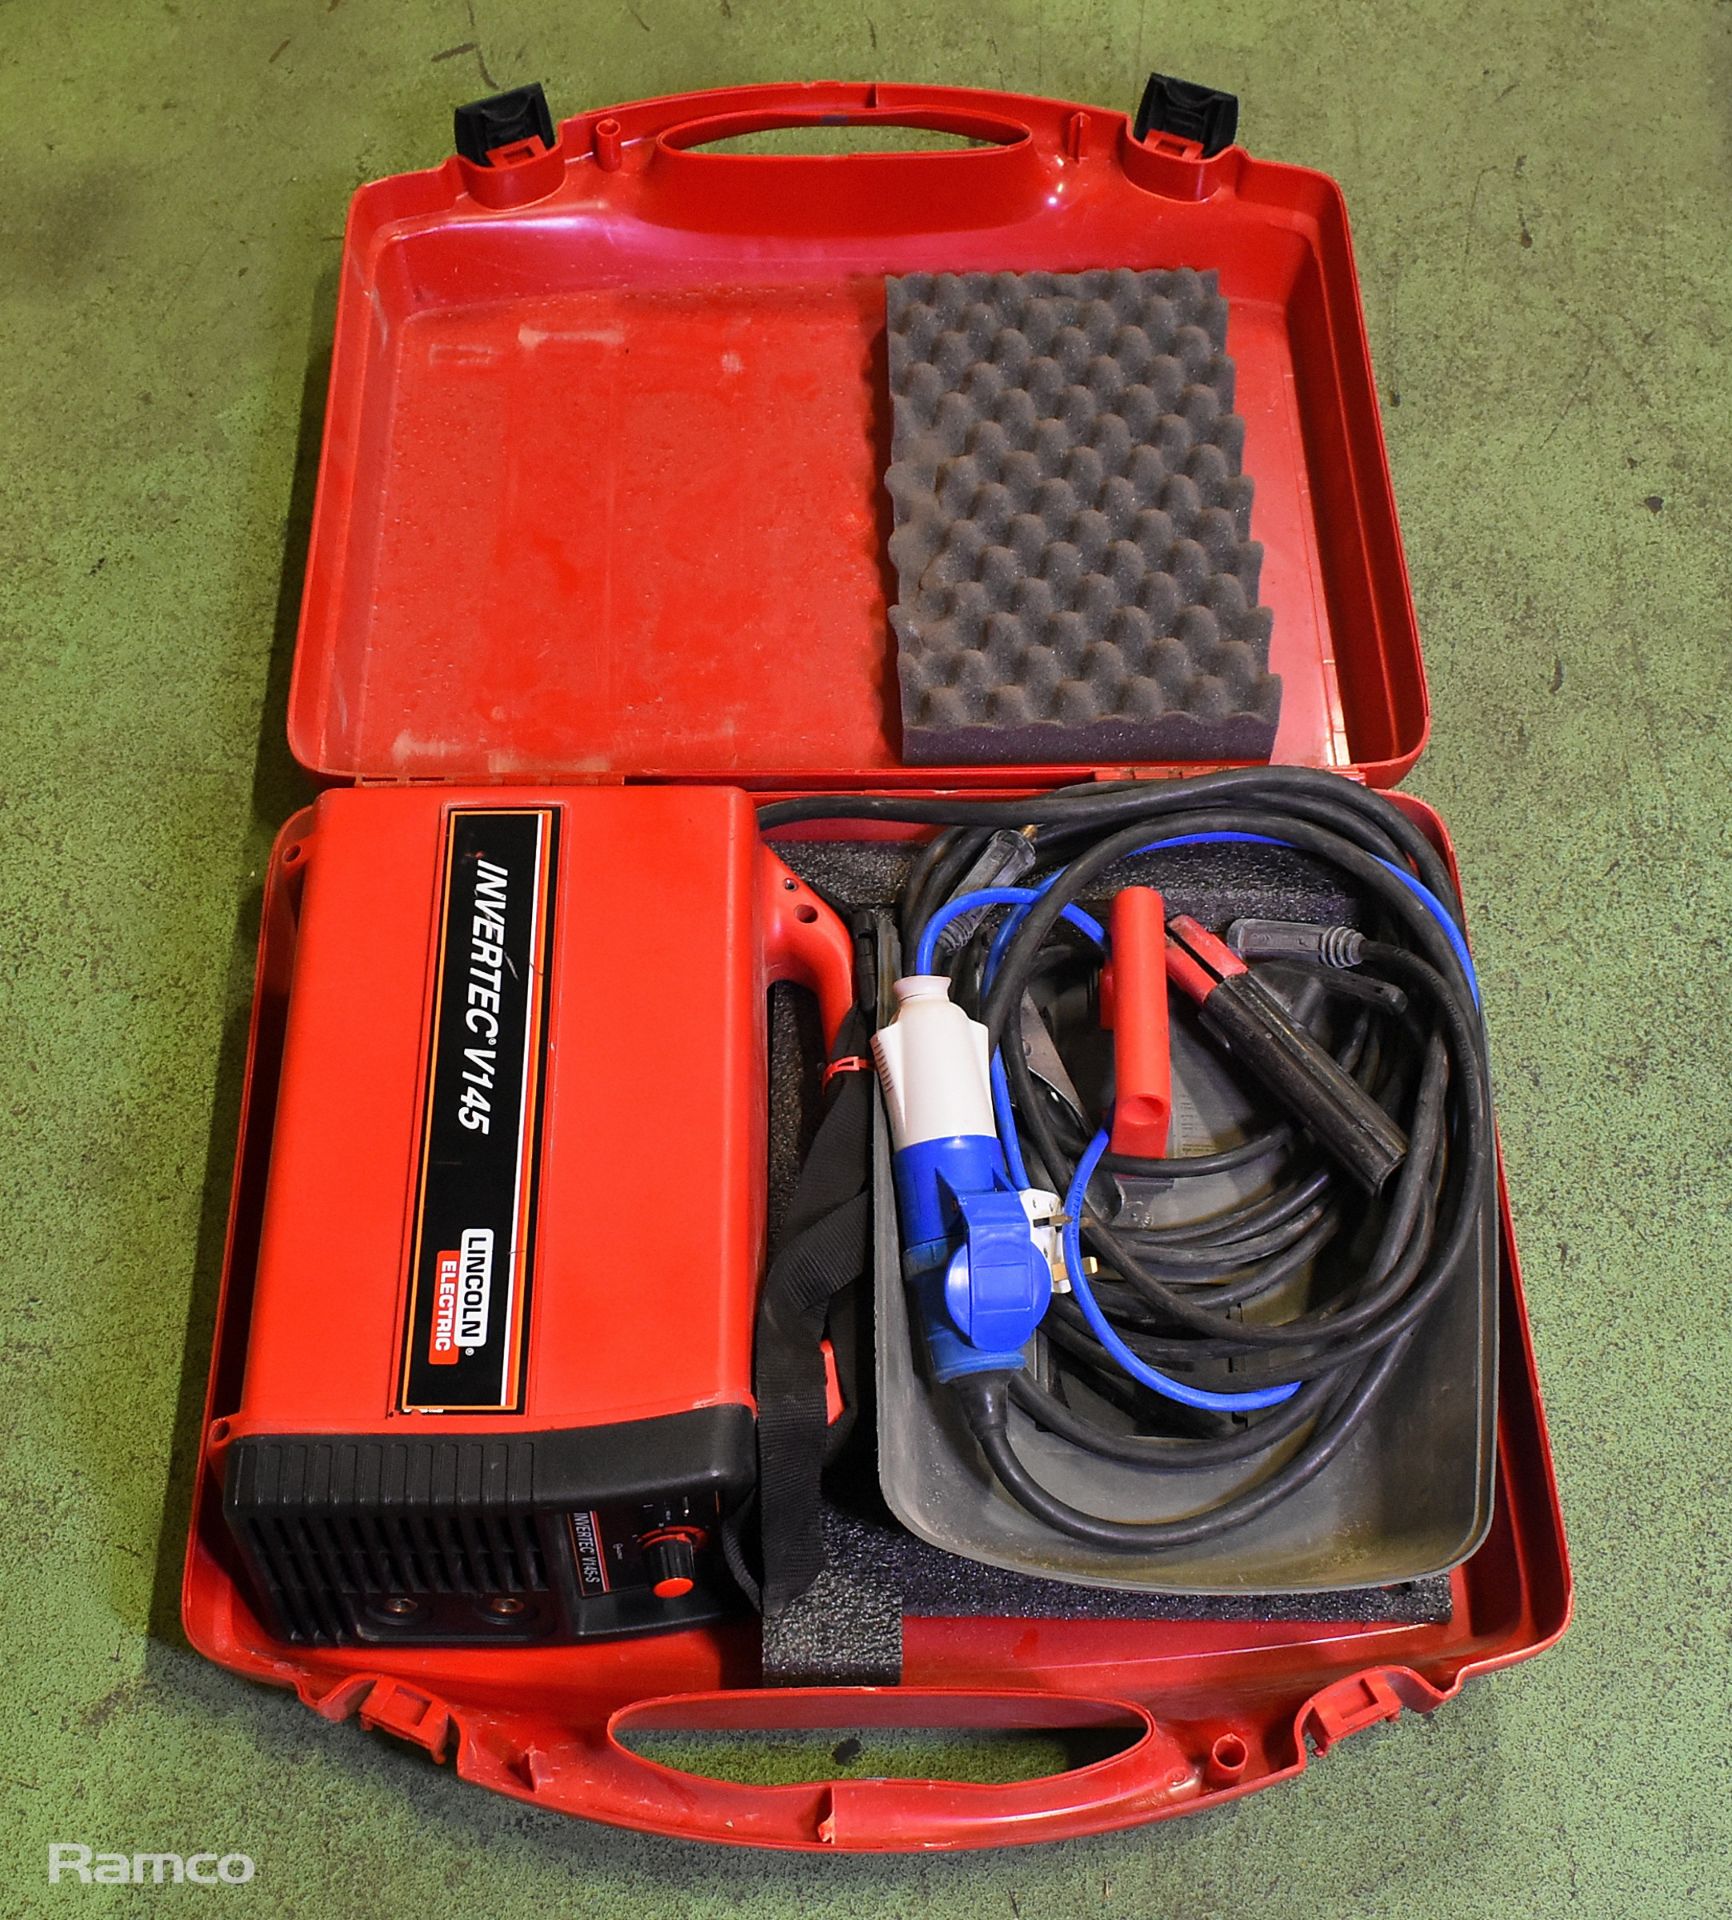 Lincoln Electric Invertec V145 welding machine in transport and storage case